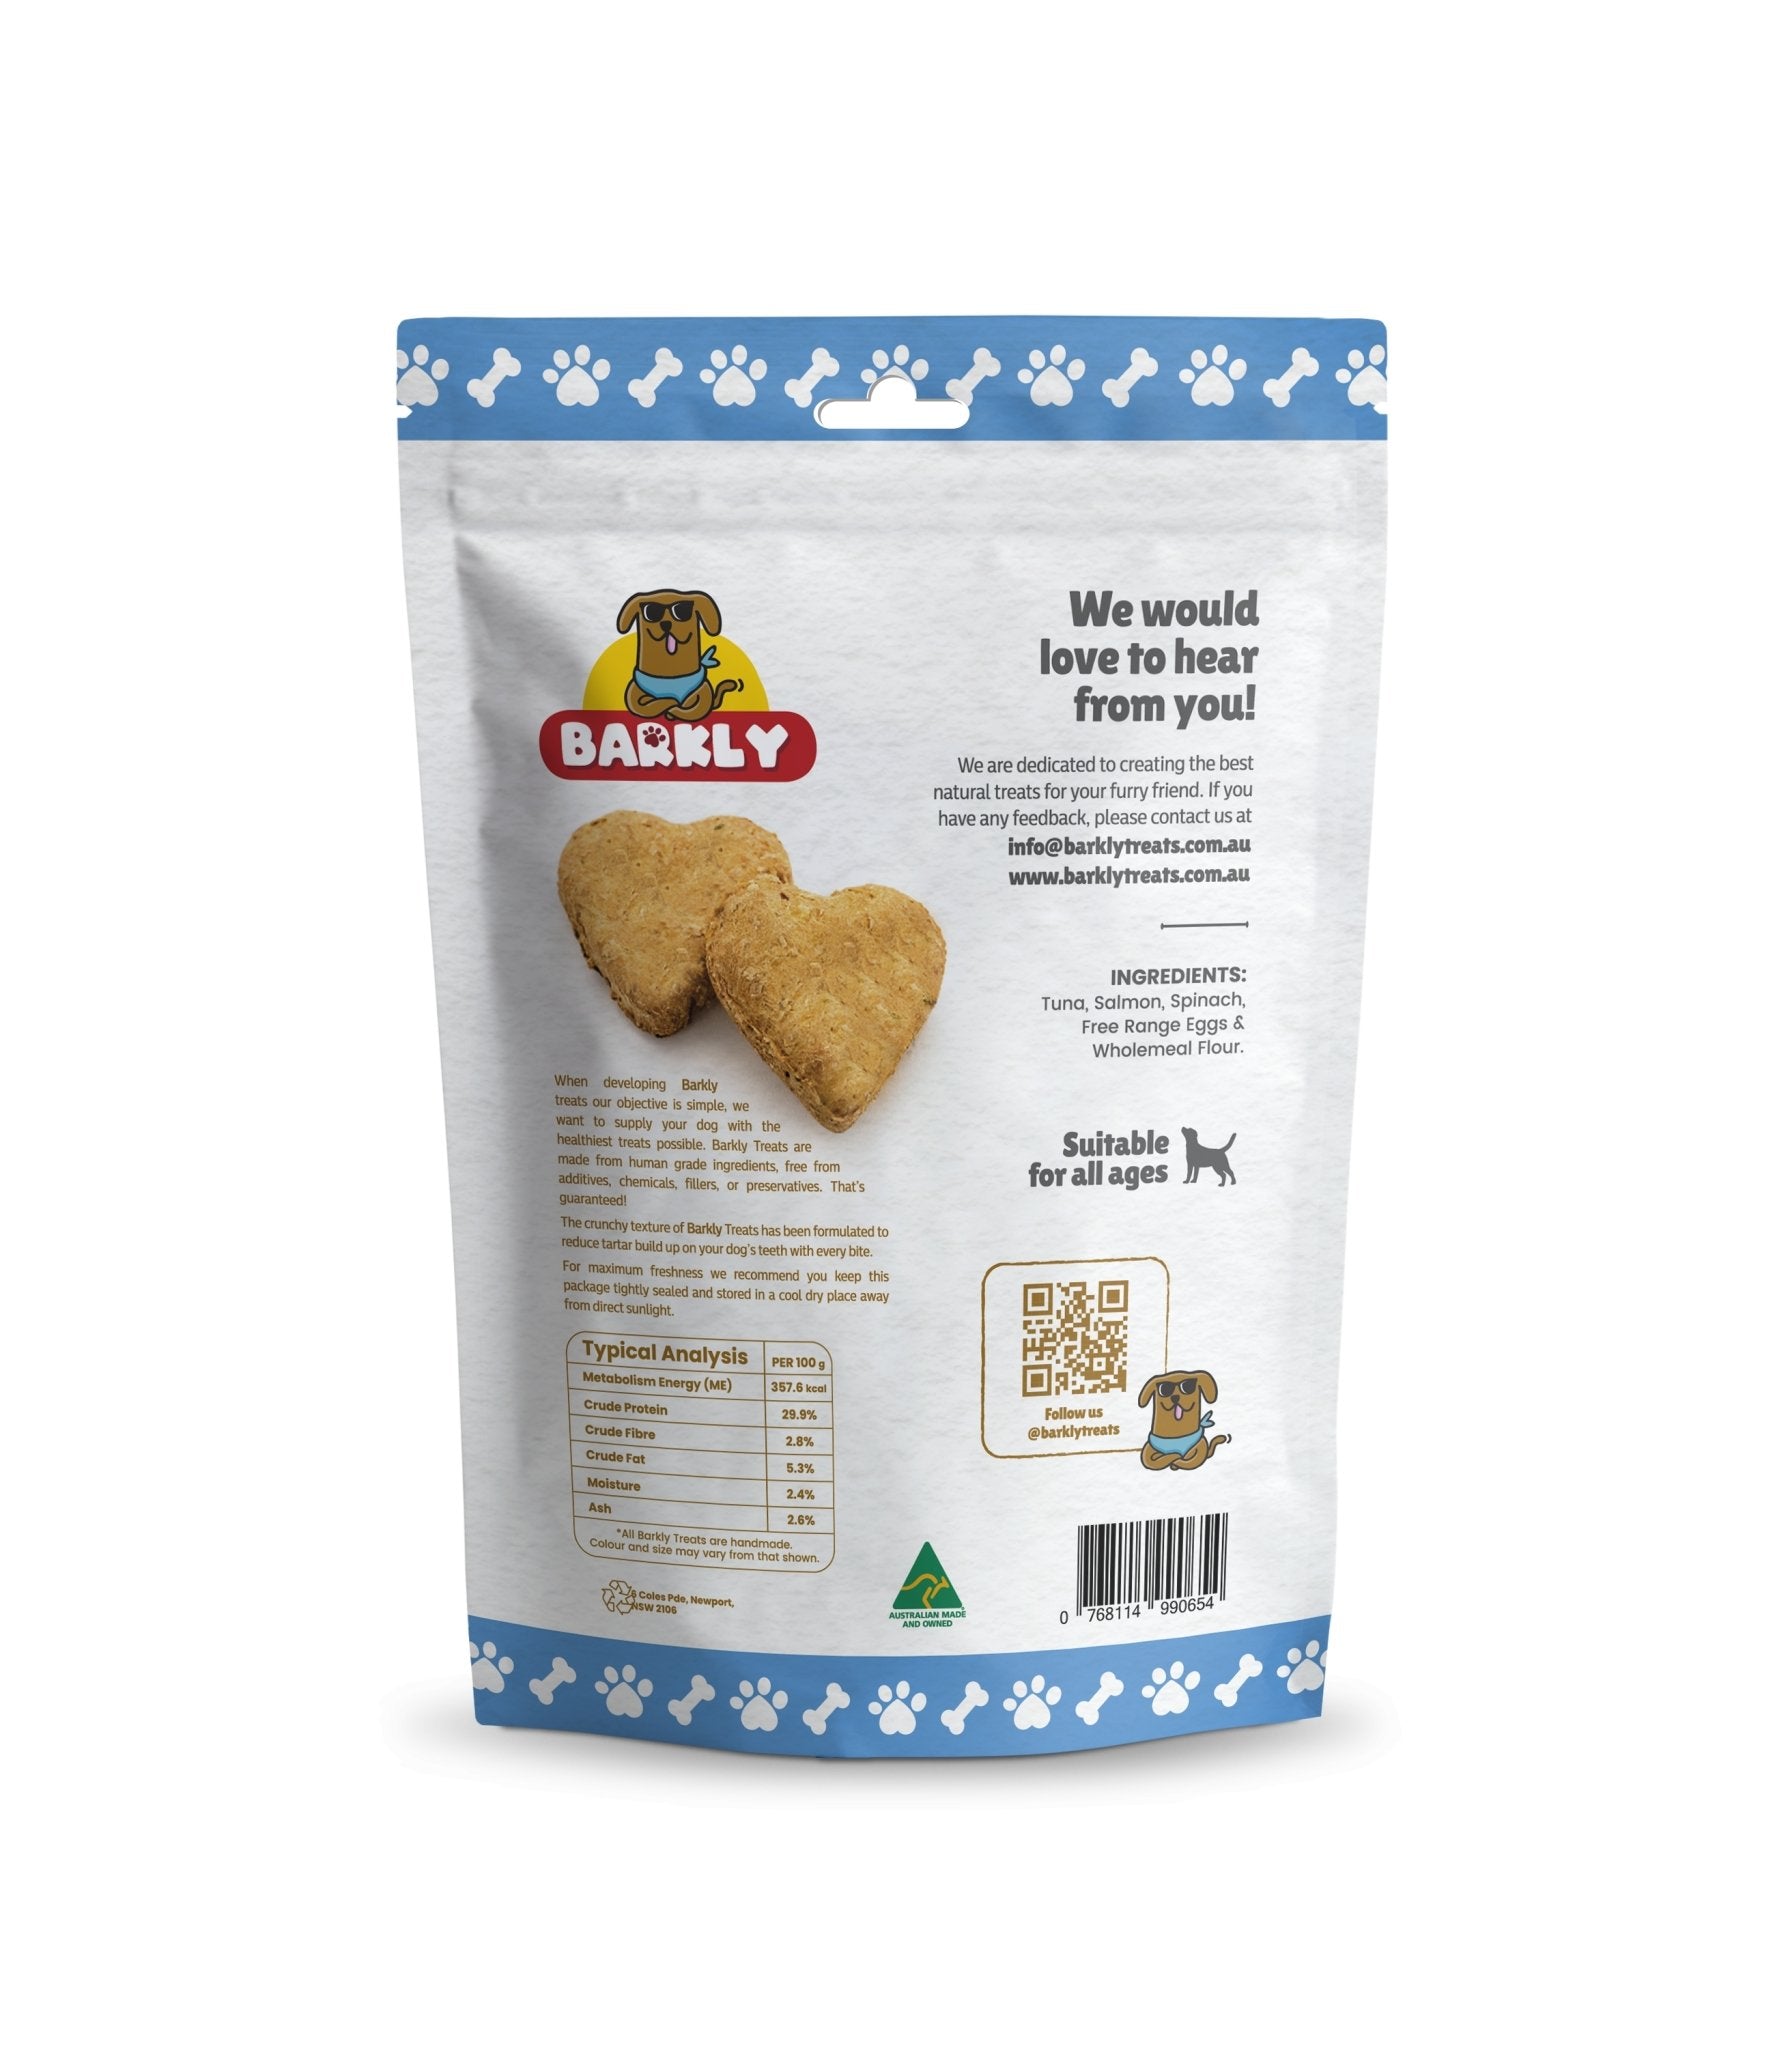 Heart-shaped Tuna, Salmon, and Spinach dog treats in a bag